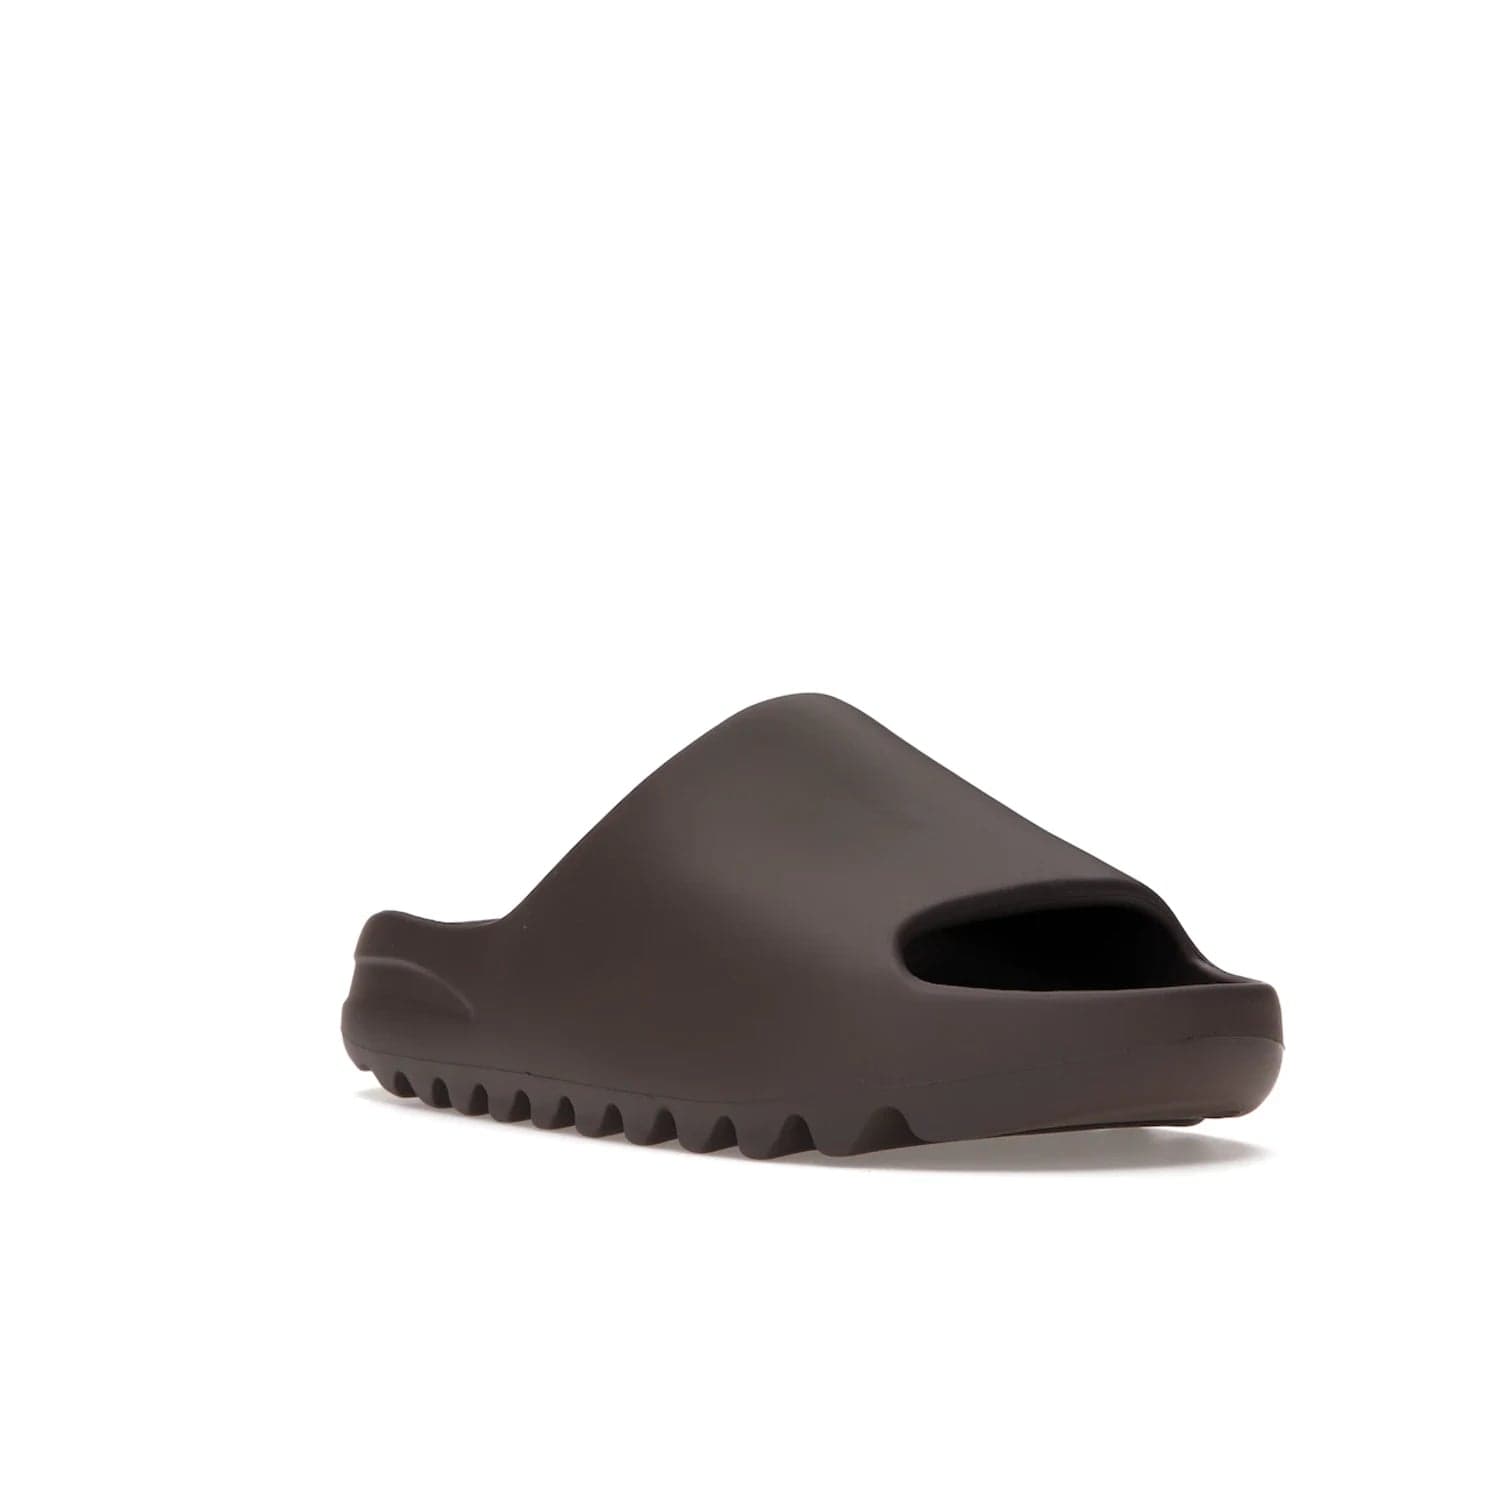 adidas Yeezy Slide Soot - Image 6 - Only at www.BallersClubKickz.com - Shop the Yeezy Slide Soot sneaker by Adidas, a sleek blend of form and function. Monochrome silhouette in Soot/Soot/Soot. Lightweight EVA foam offers comfort and durability. Get the must-have style today.